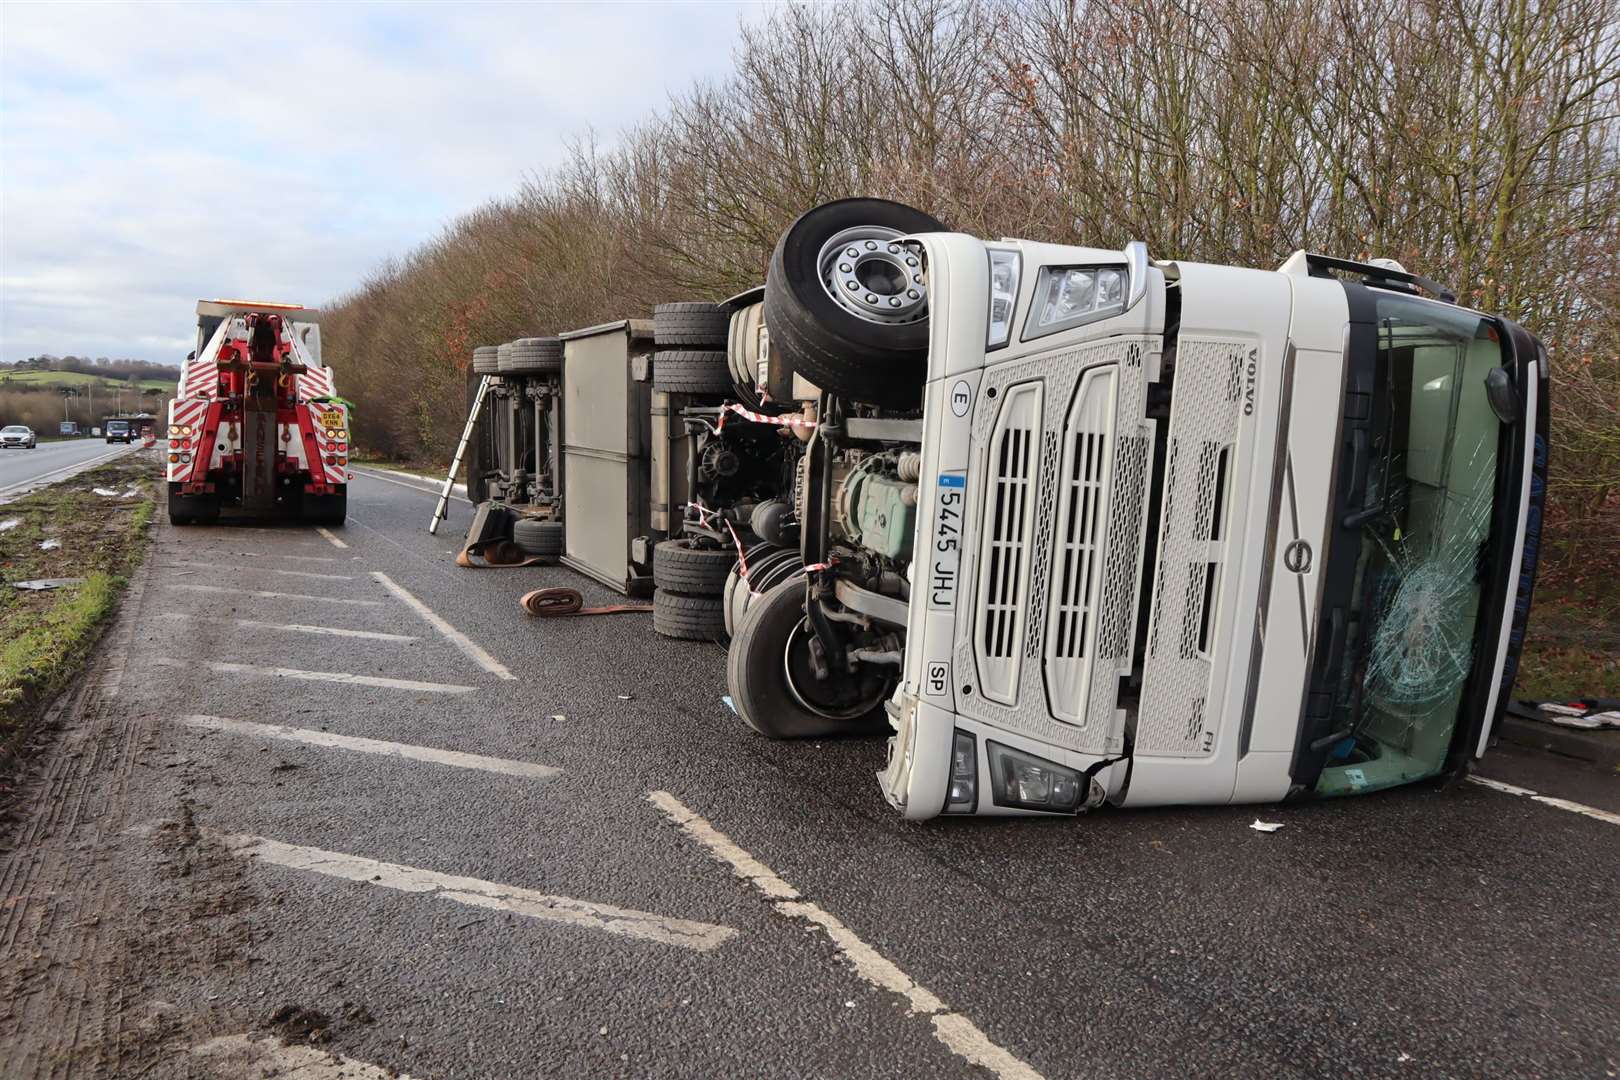 Recovery crews arrive for an overturned lorry blocking the Bobbing slip road of the A249